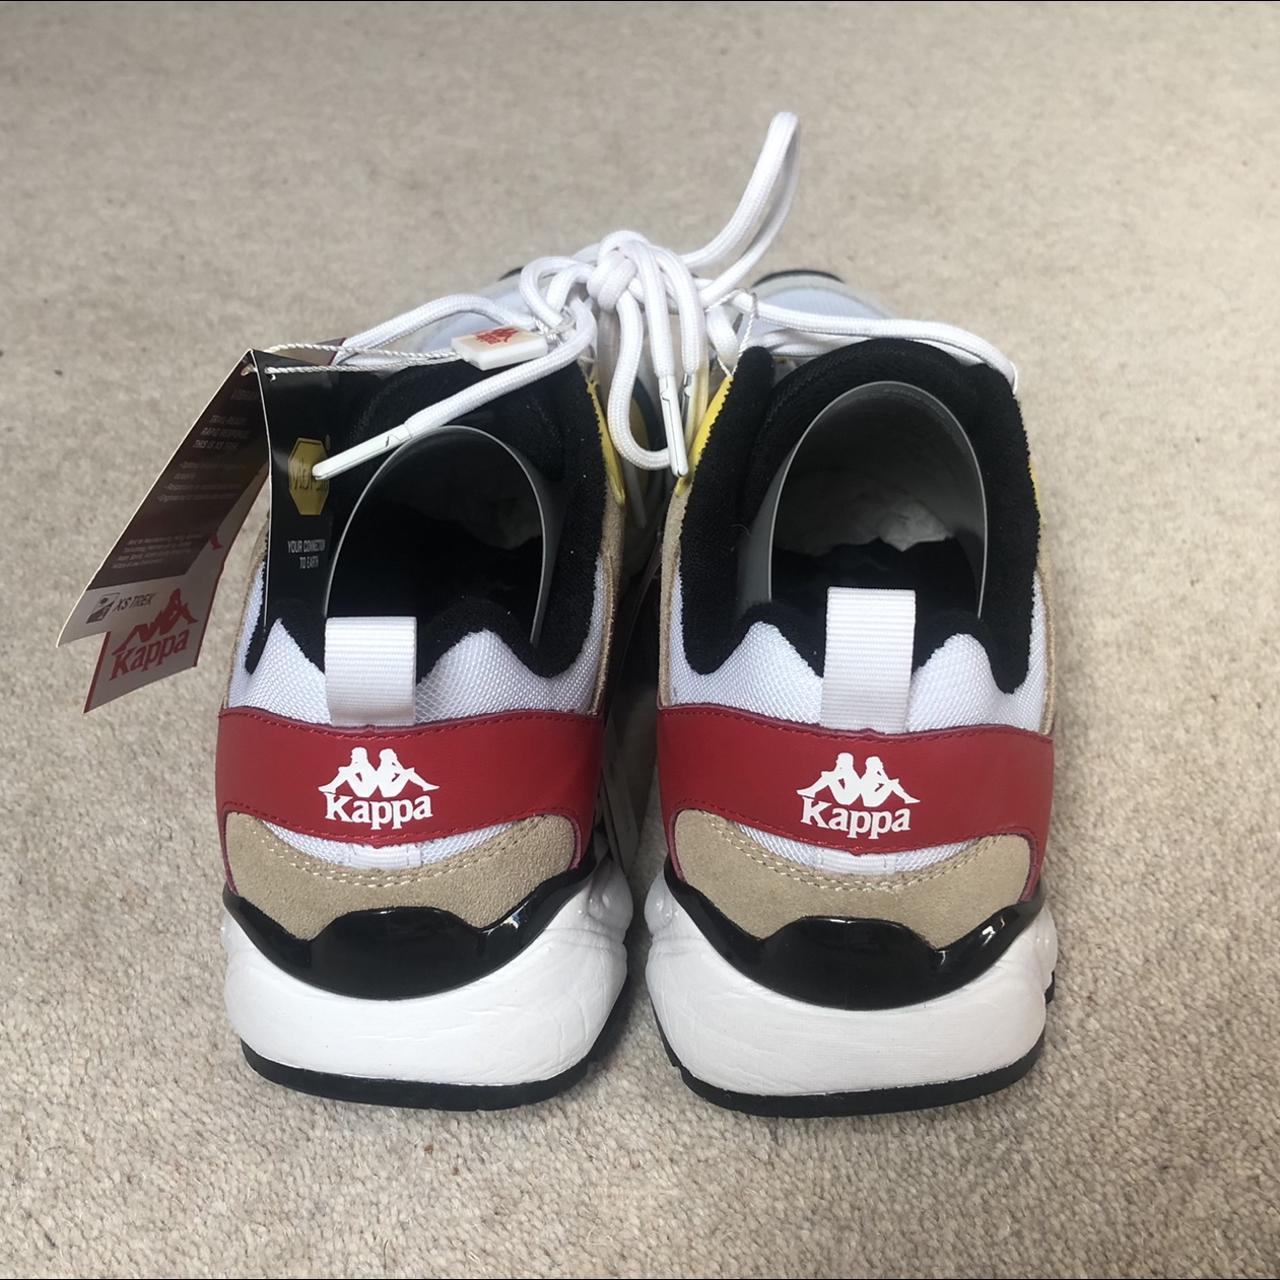 Kappa multi colour trainers/shoes with... new Depop - Brand